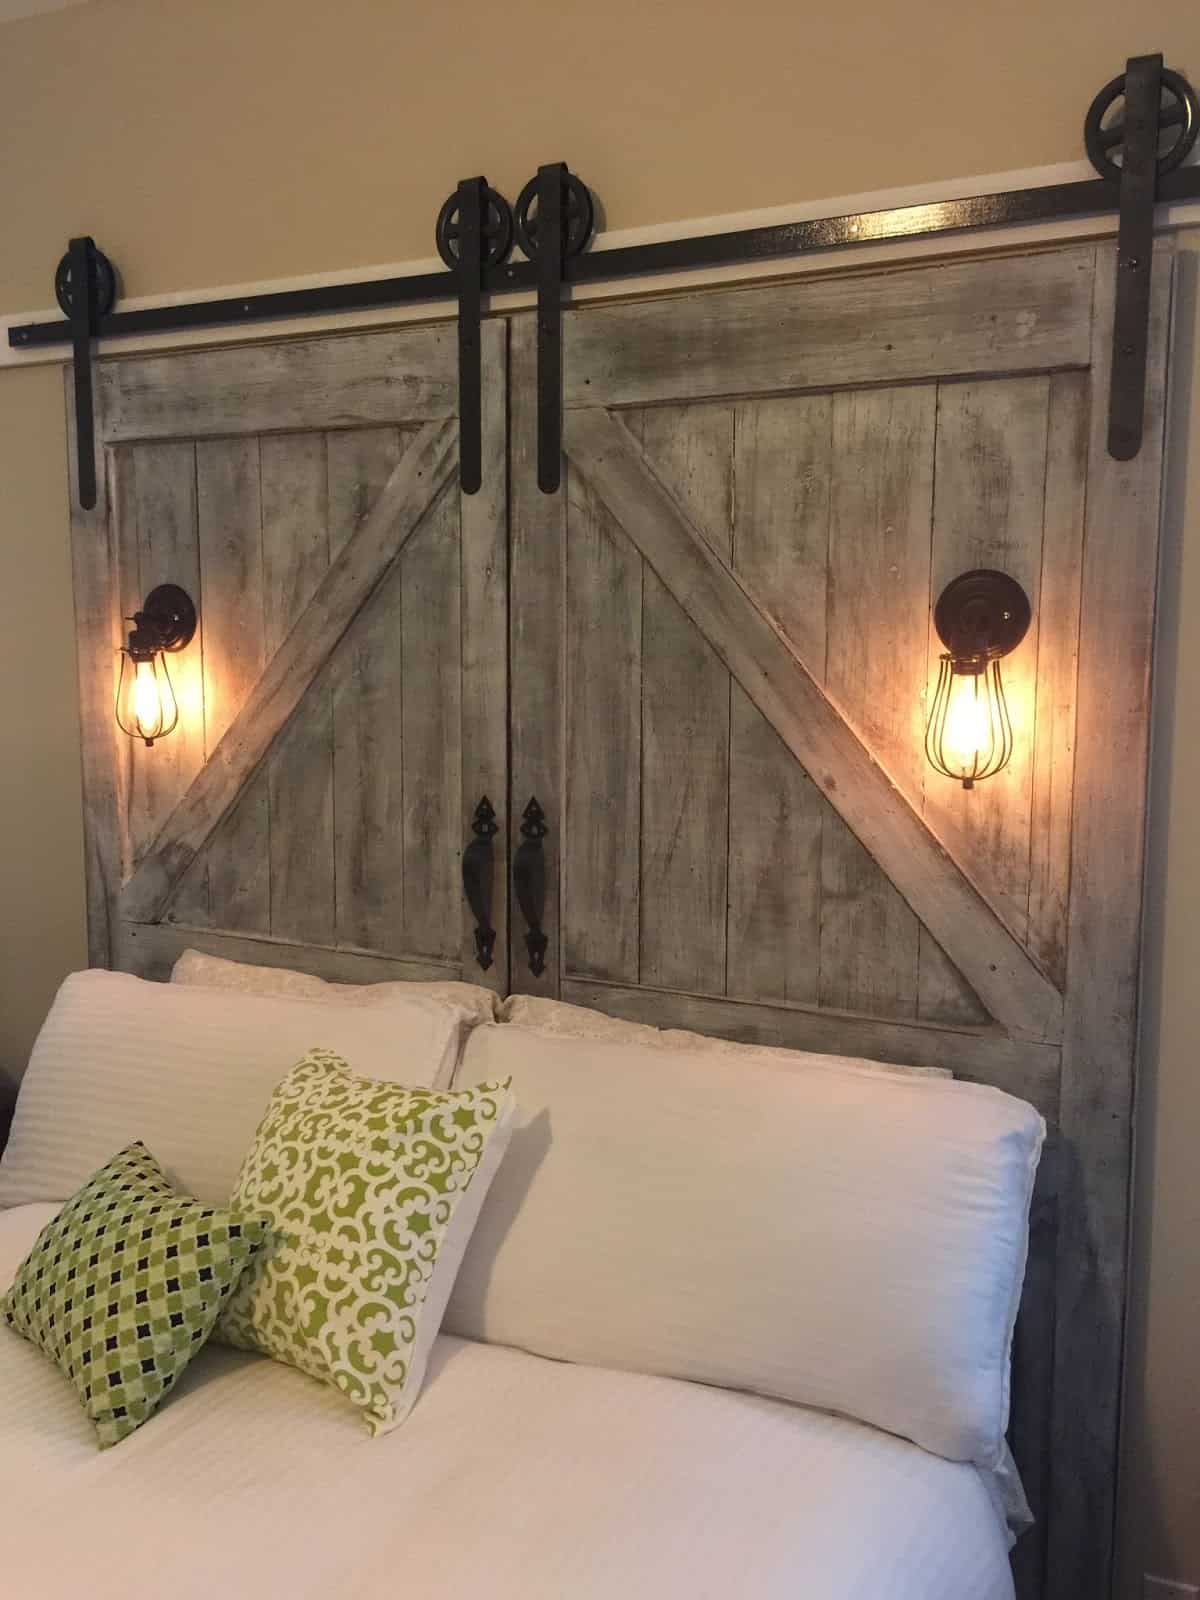 Adding lights to your barn door headboard is an excellent way to customize the bed space.